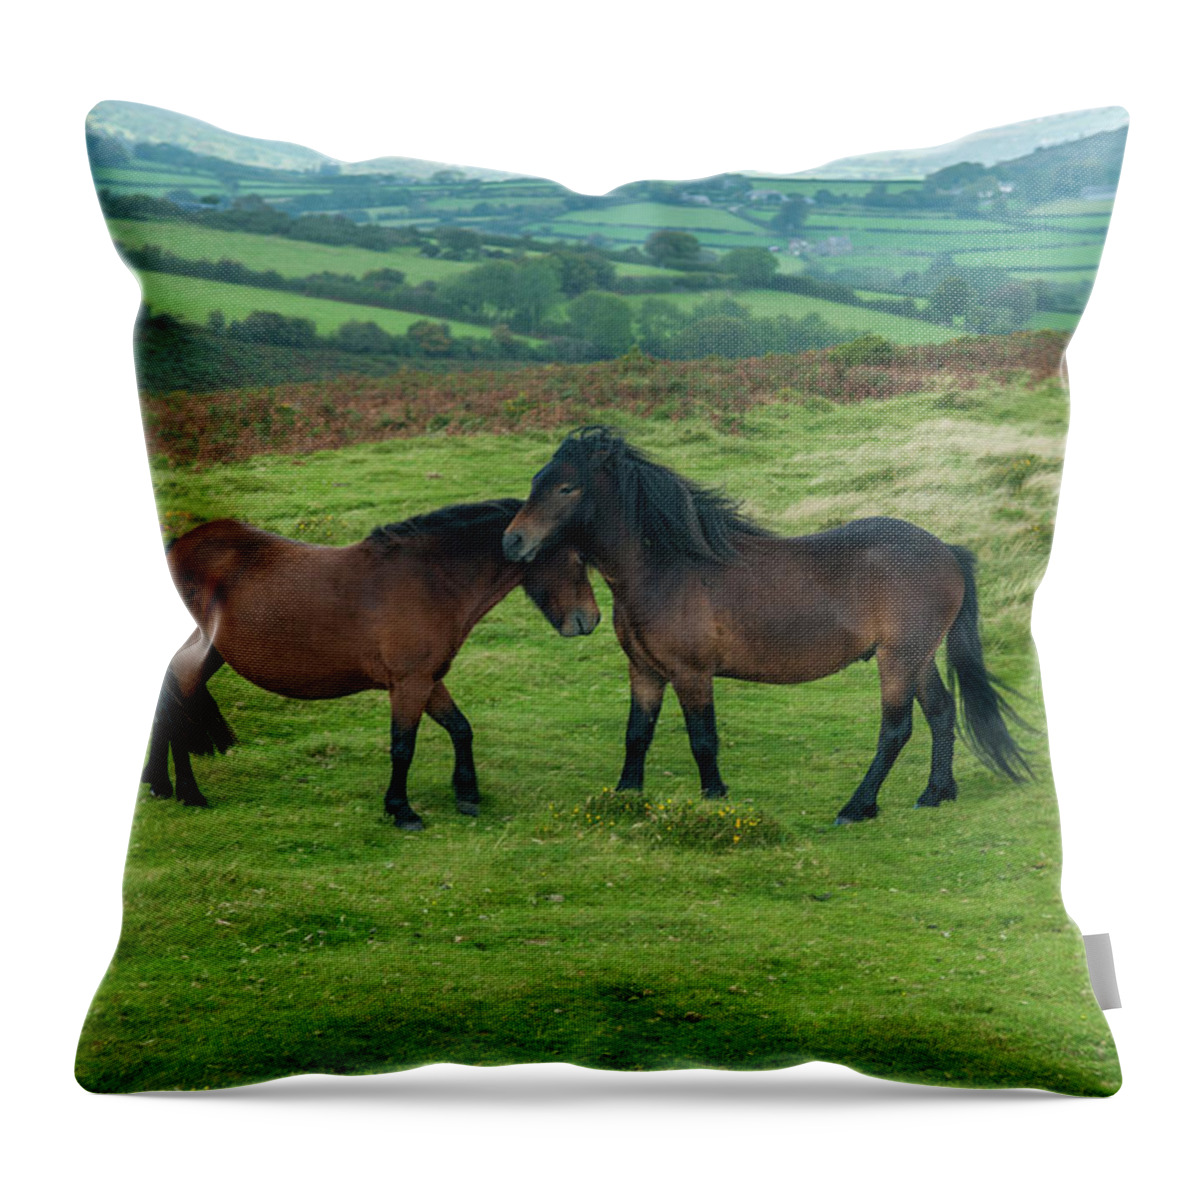 Horse Throw Pillow featuring the photograph Two Affectionate Wild Ponies by Abdul Kadir Audah